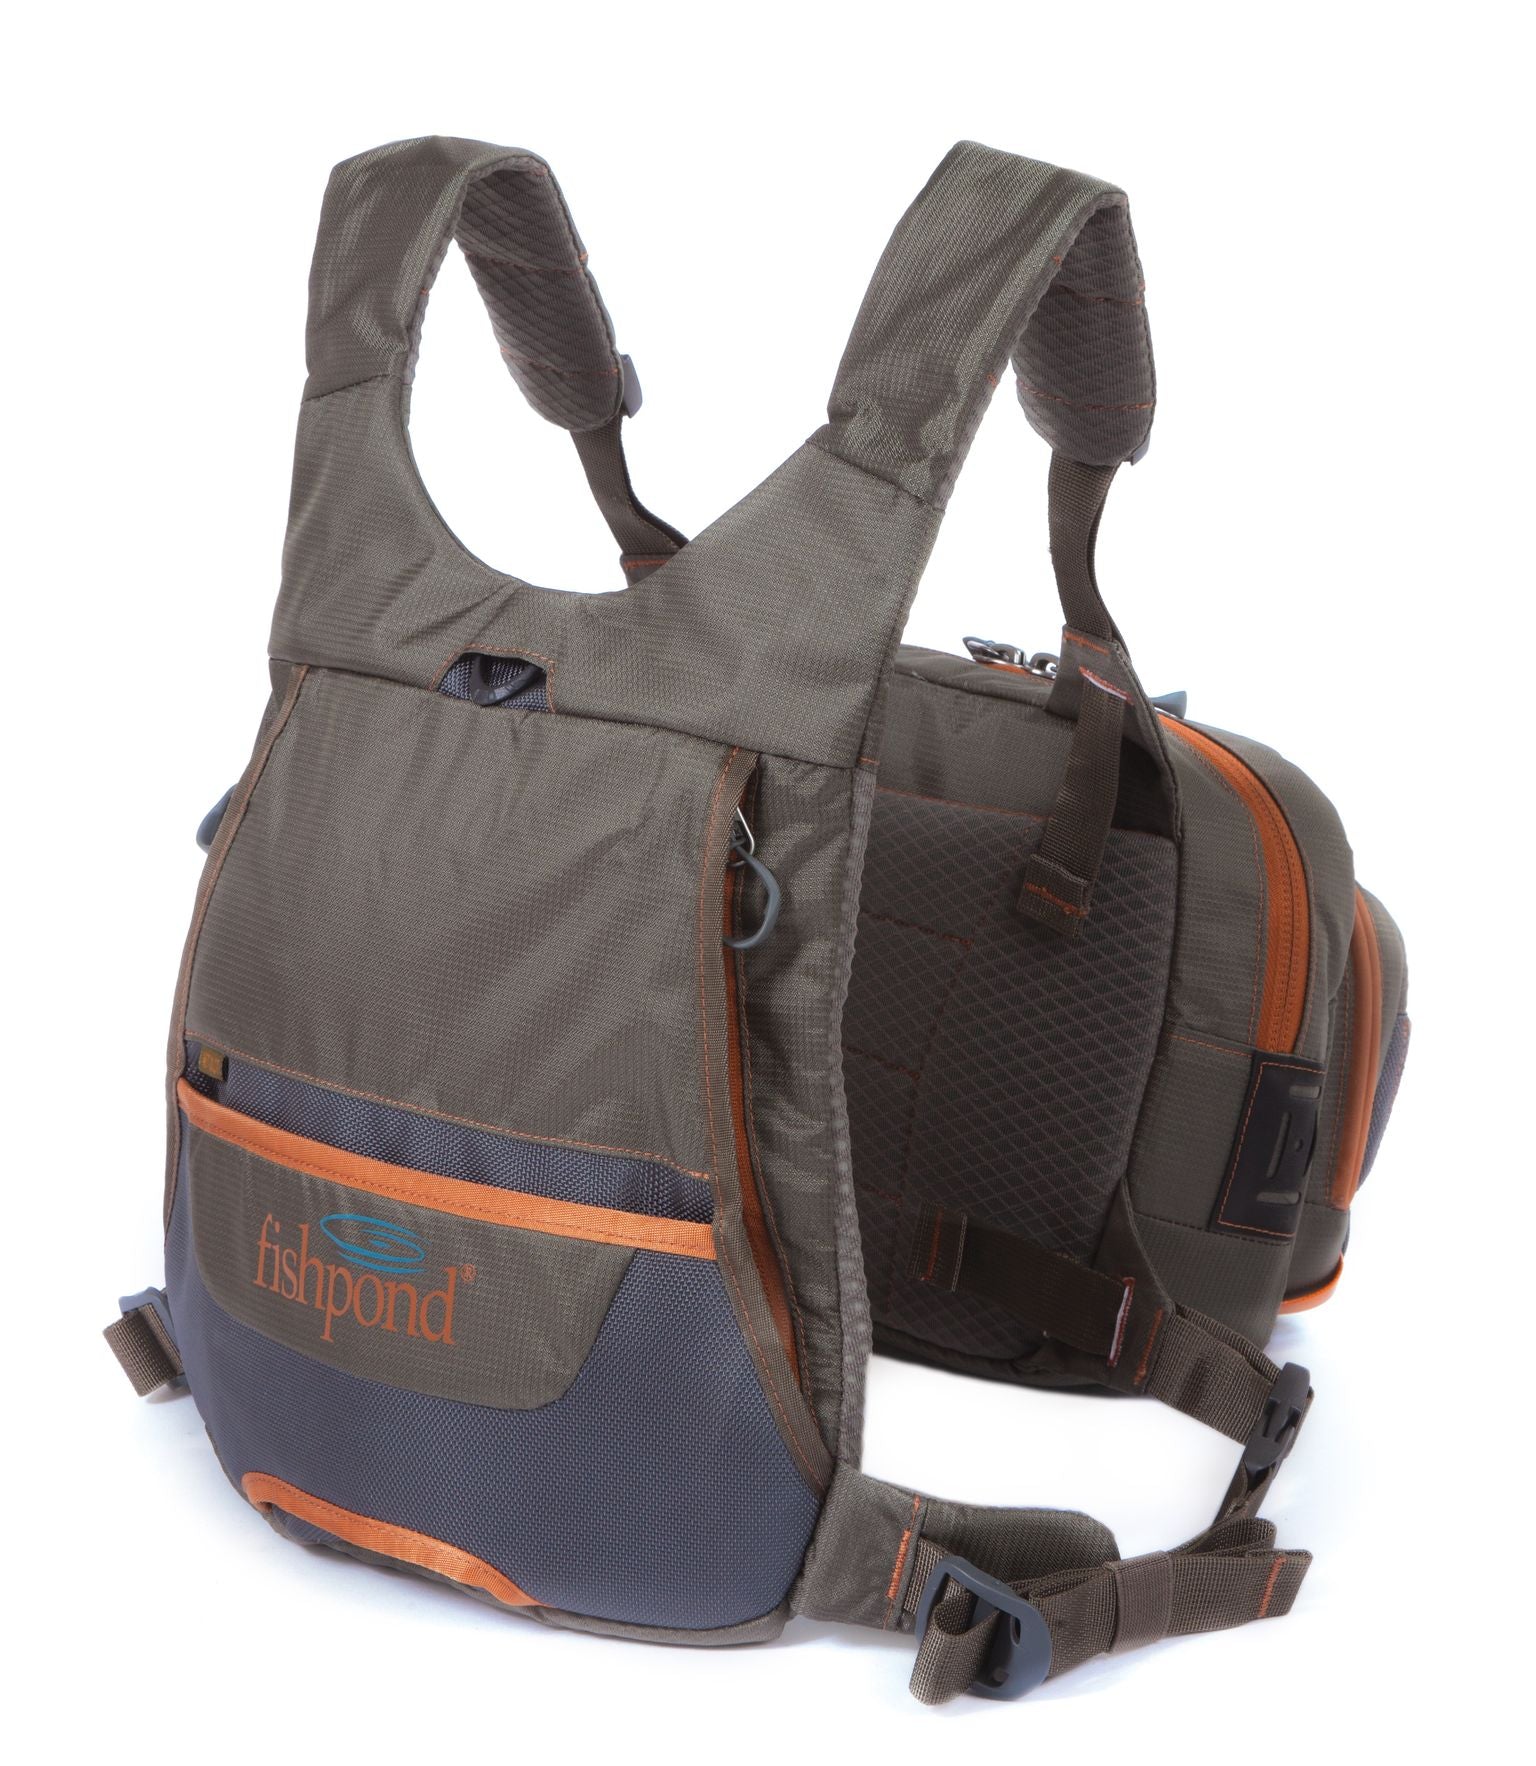 FISHPOND CROSS CURRENT CHEST PACK SYSTEM